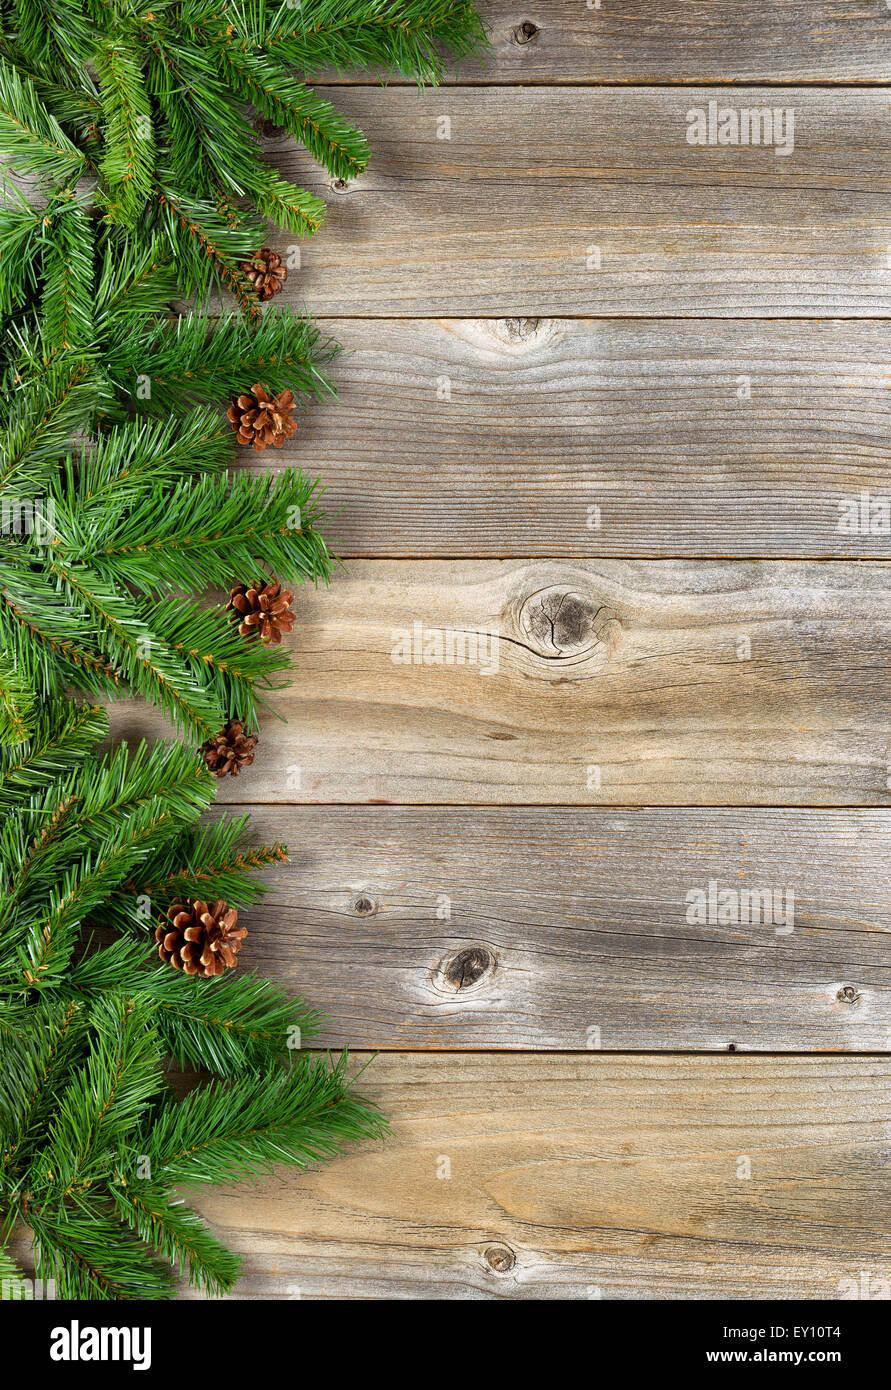 Christmas border with pine tree branches, and cones on rustic wooden boards. Layout in vertical format. Stock Photo